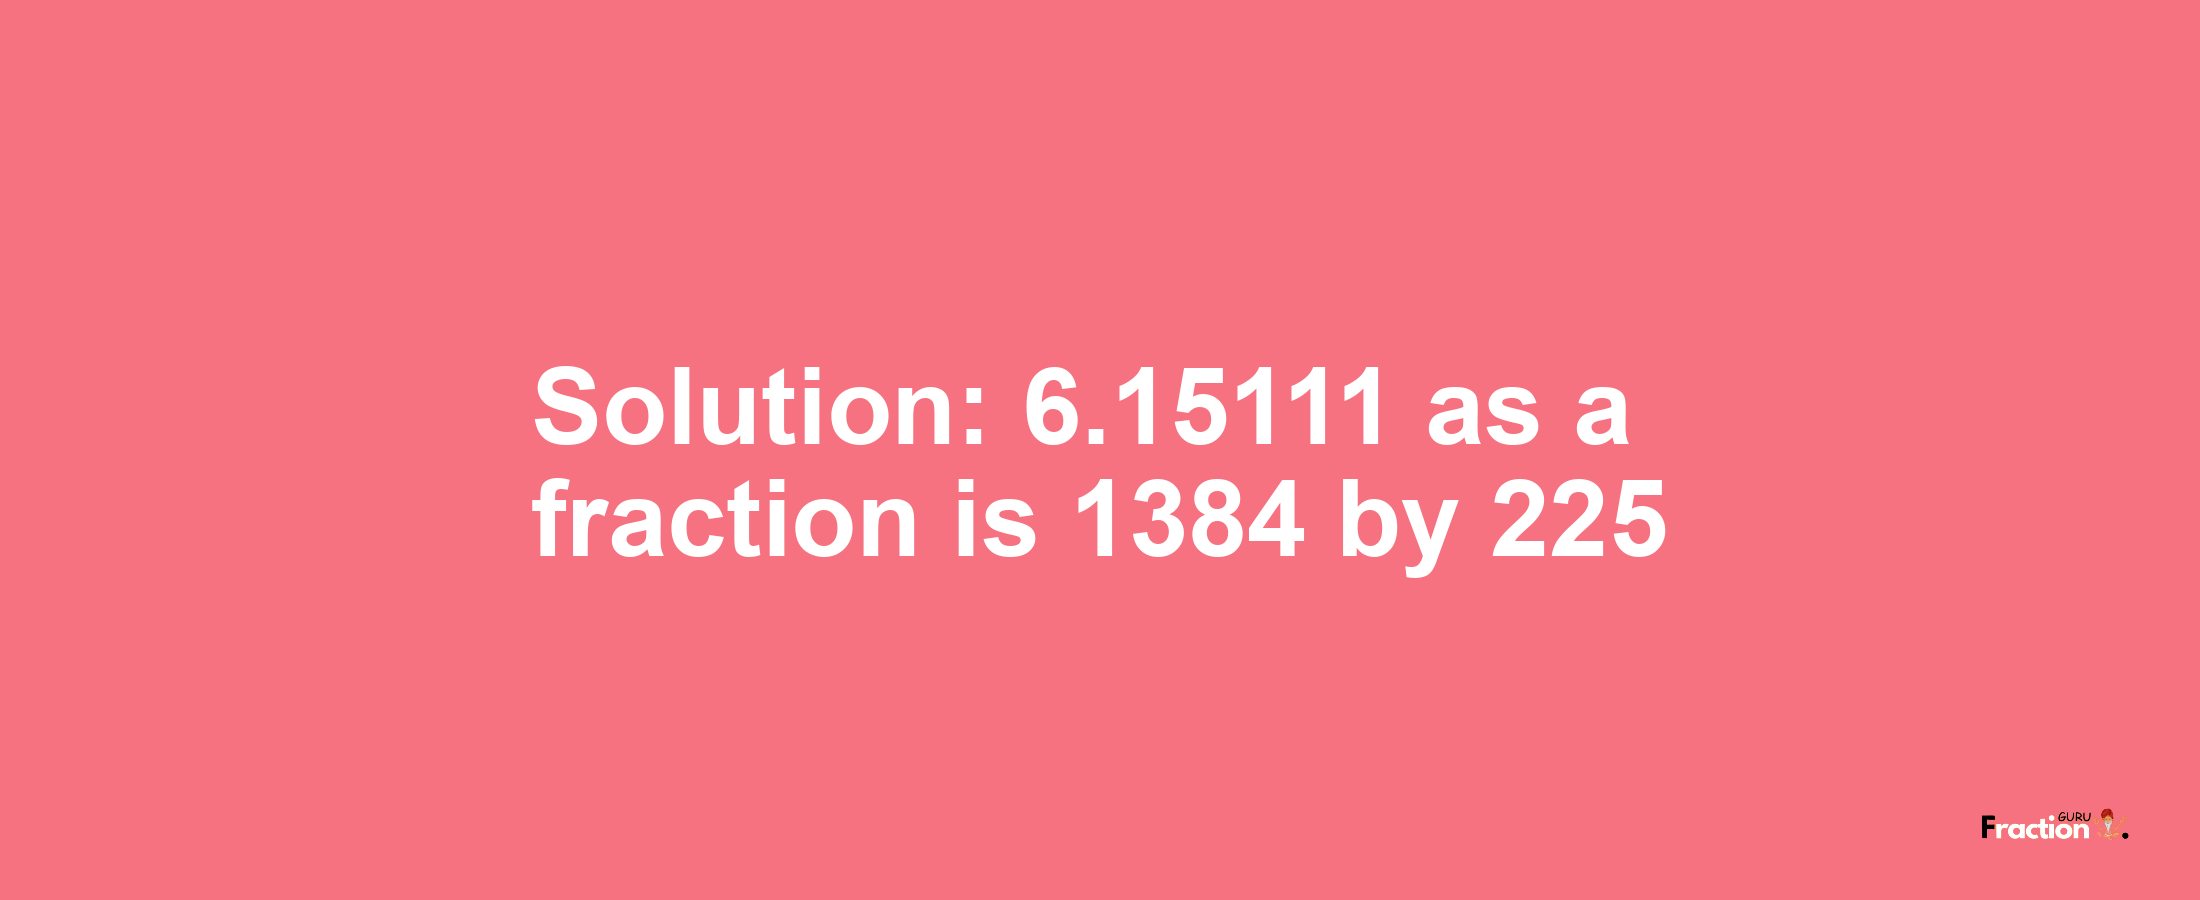 Solution:6.15111 as a fraction is 1384/225